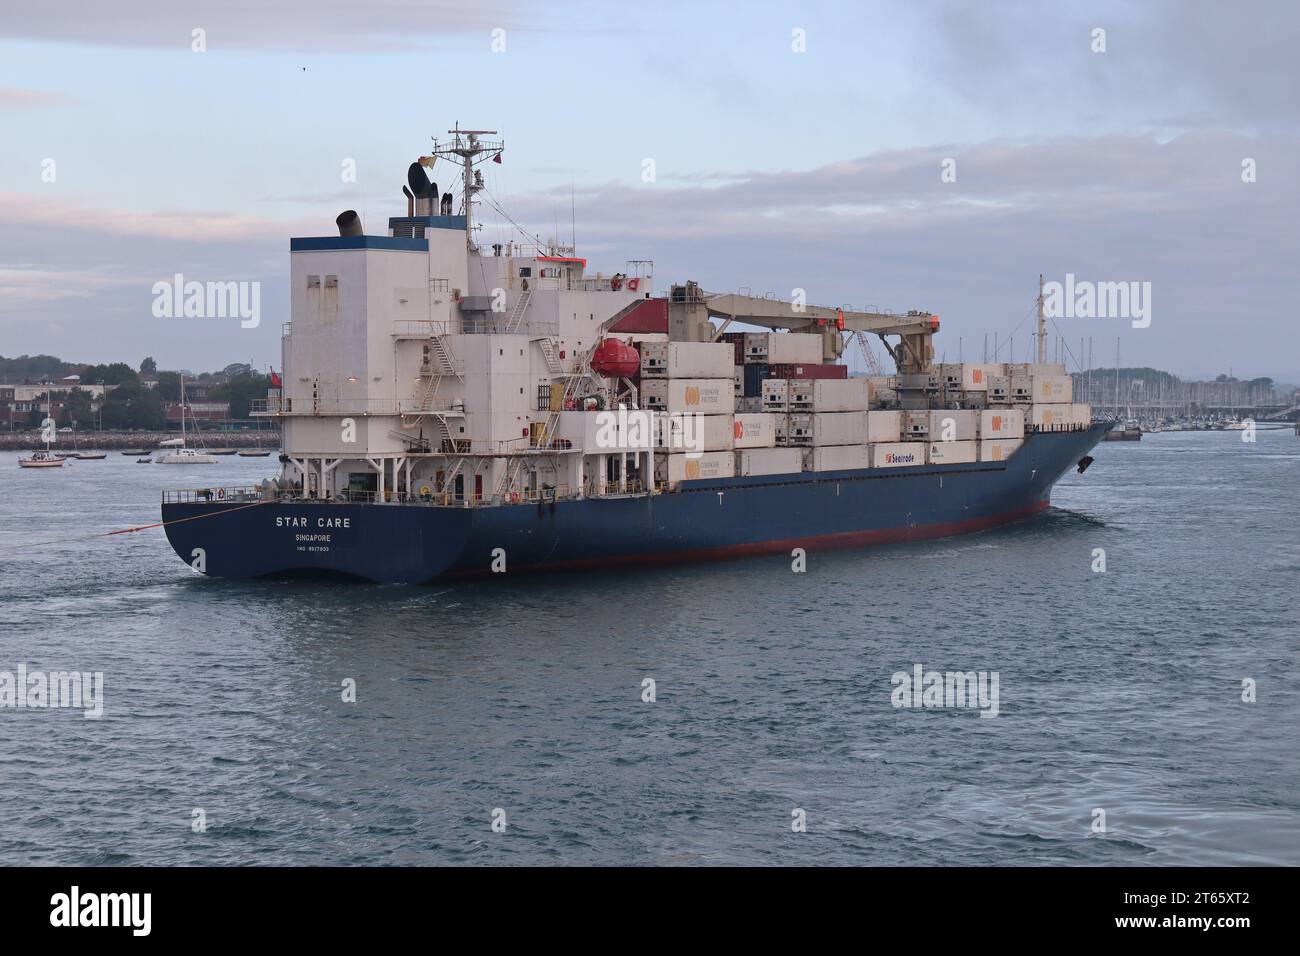 The refrigerated cargo vessel MV STAR CARE making its way to the international port Stock Photo